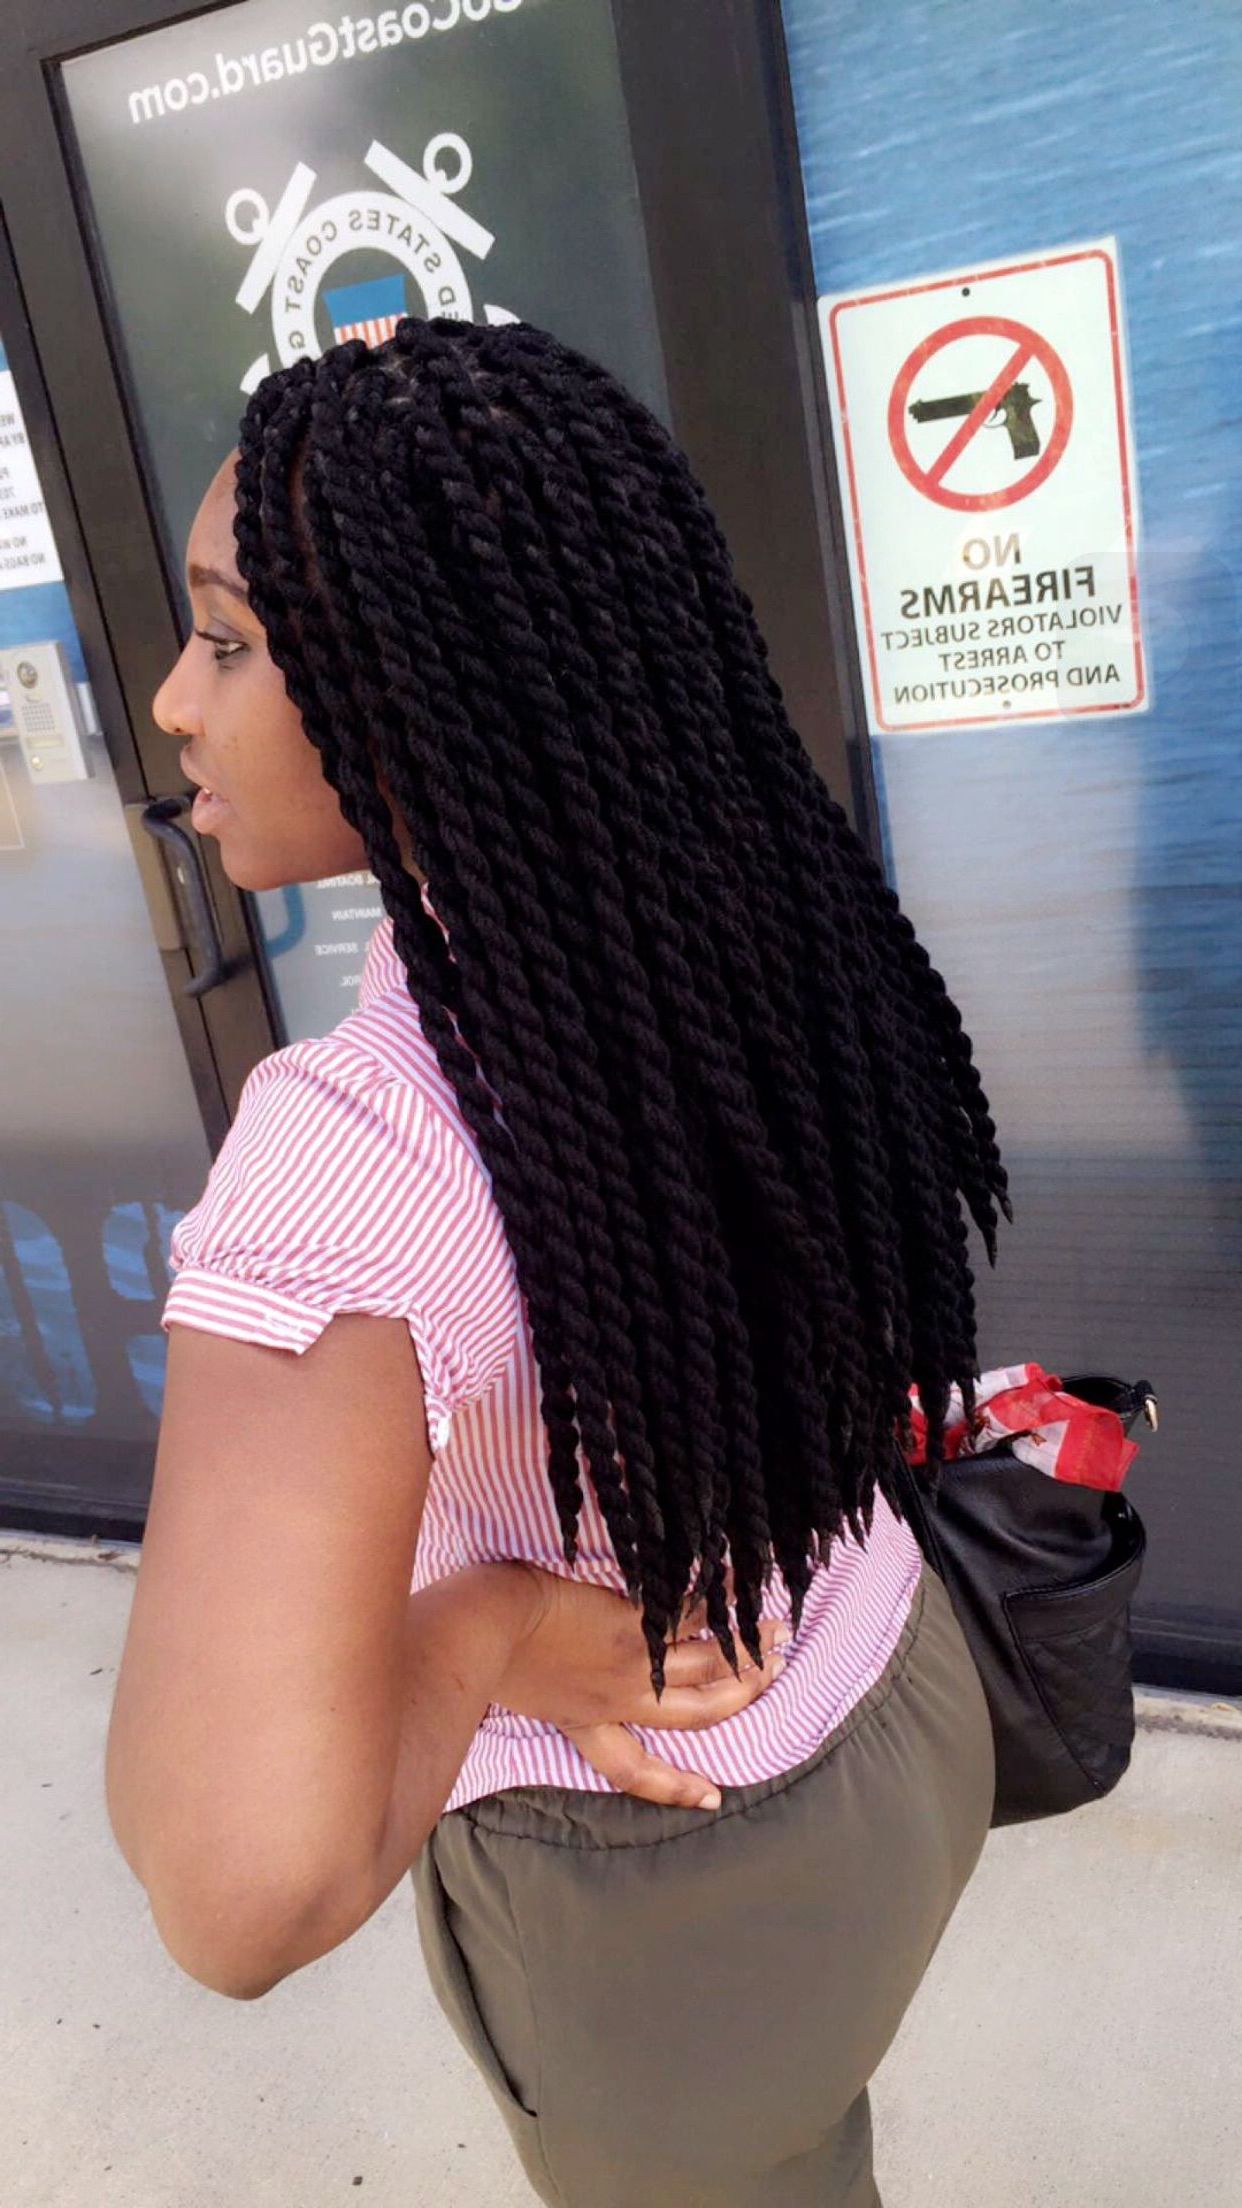 Famous Very Thick And Long Twists Yarn Braid Hairstyles With Regard To Yarn Twistssoexquisitebraids (View 7 of 20)